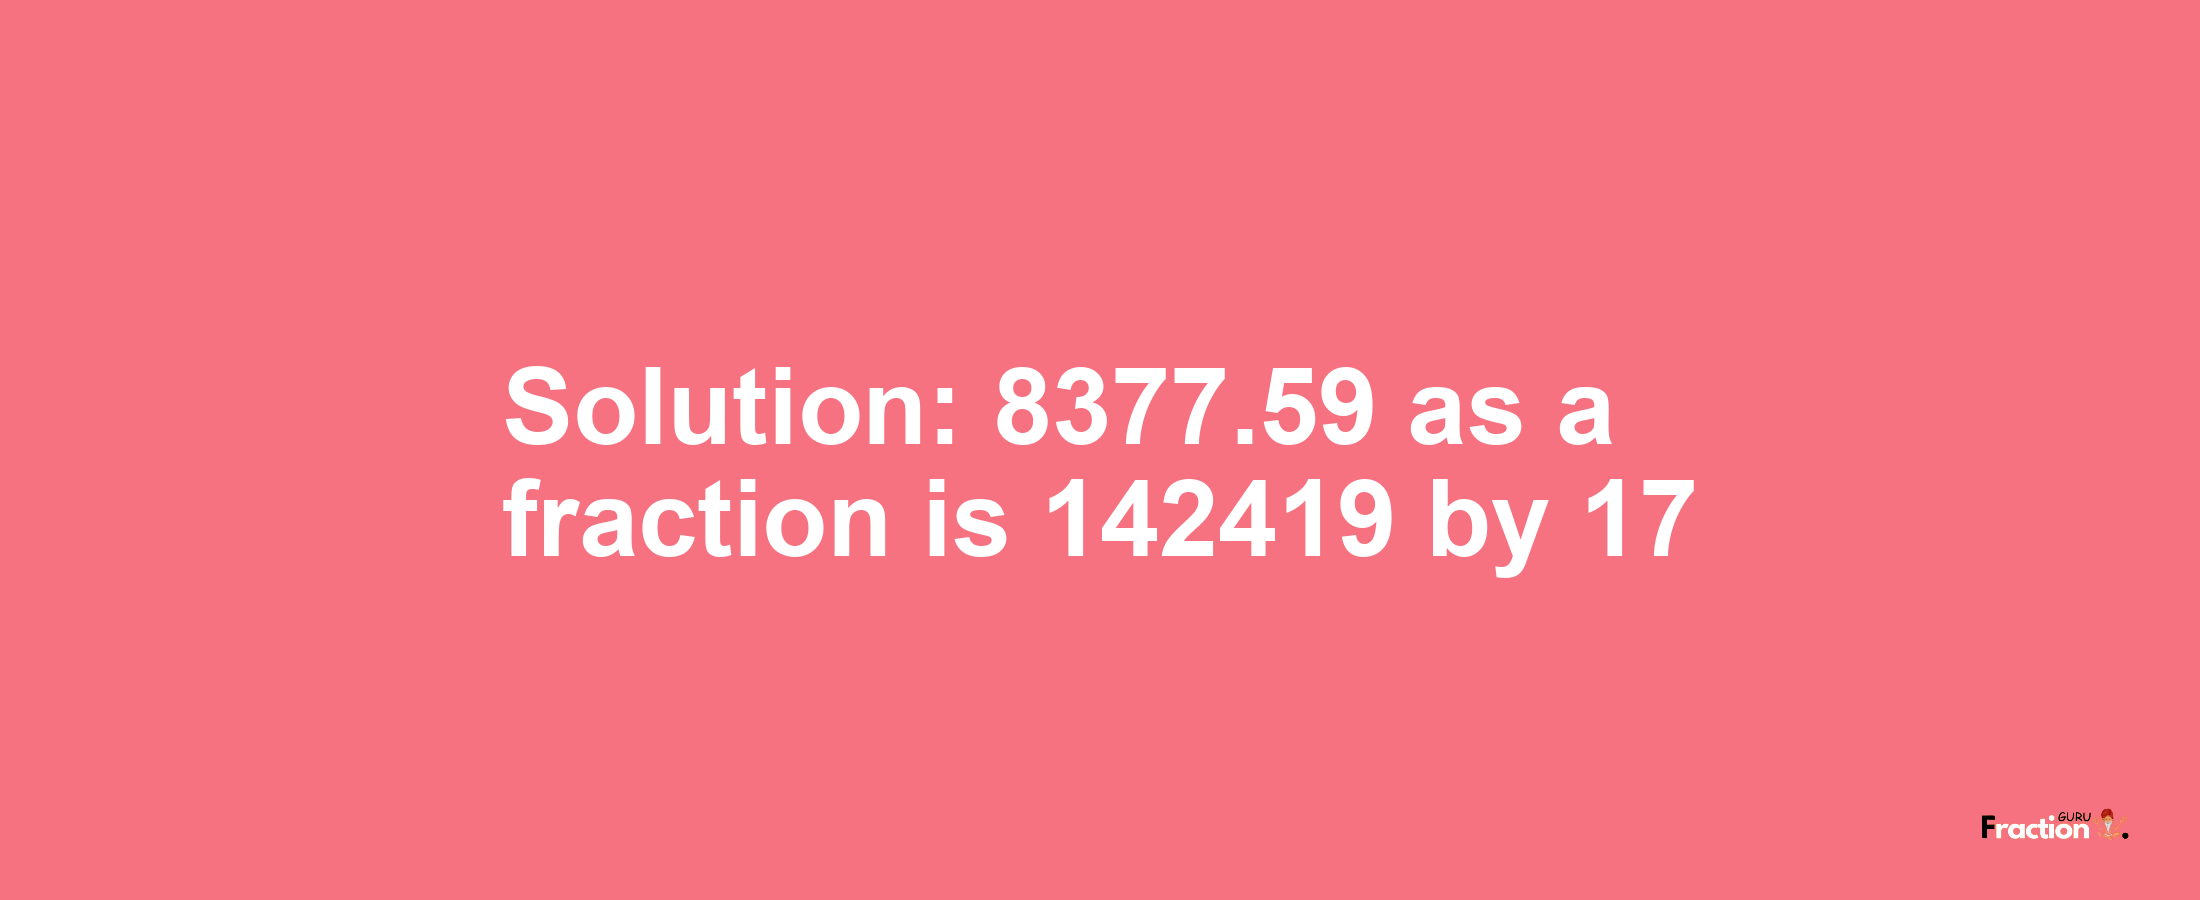 Solution:8377.59 as a fraction is 142419/17